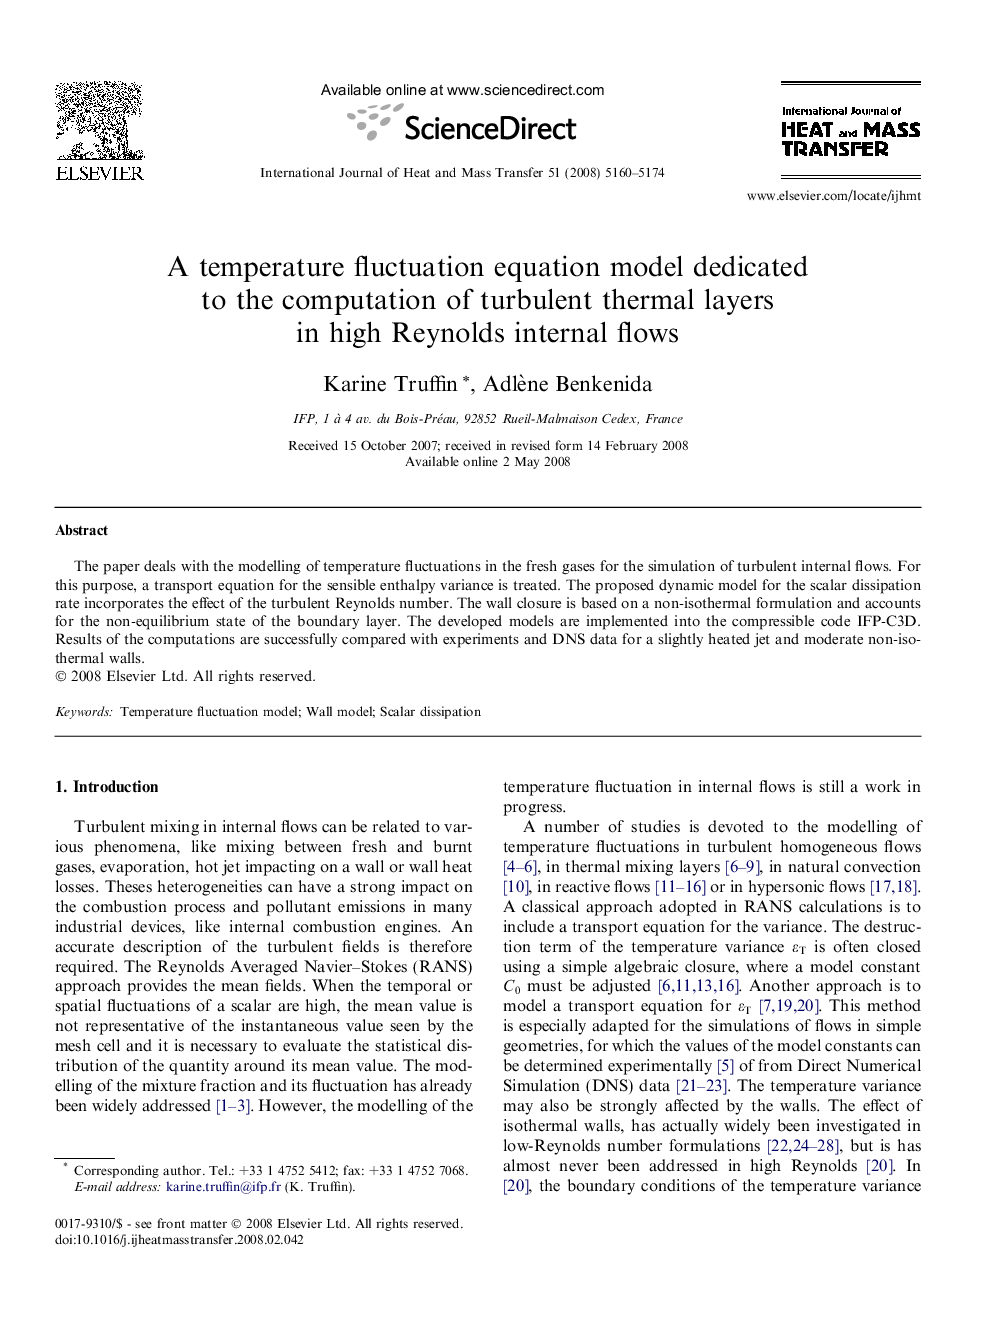 A temperature fluctuation equation model dedicated to the computation of turbulent thermal layers in high Reynolds internal flows